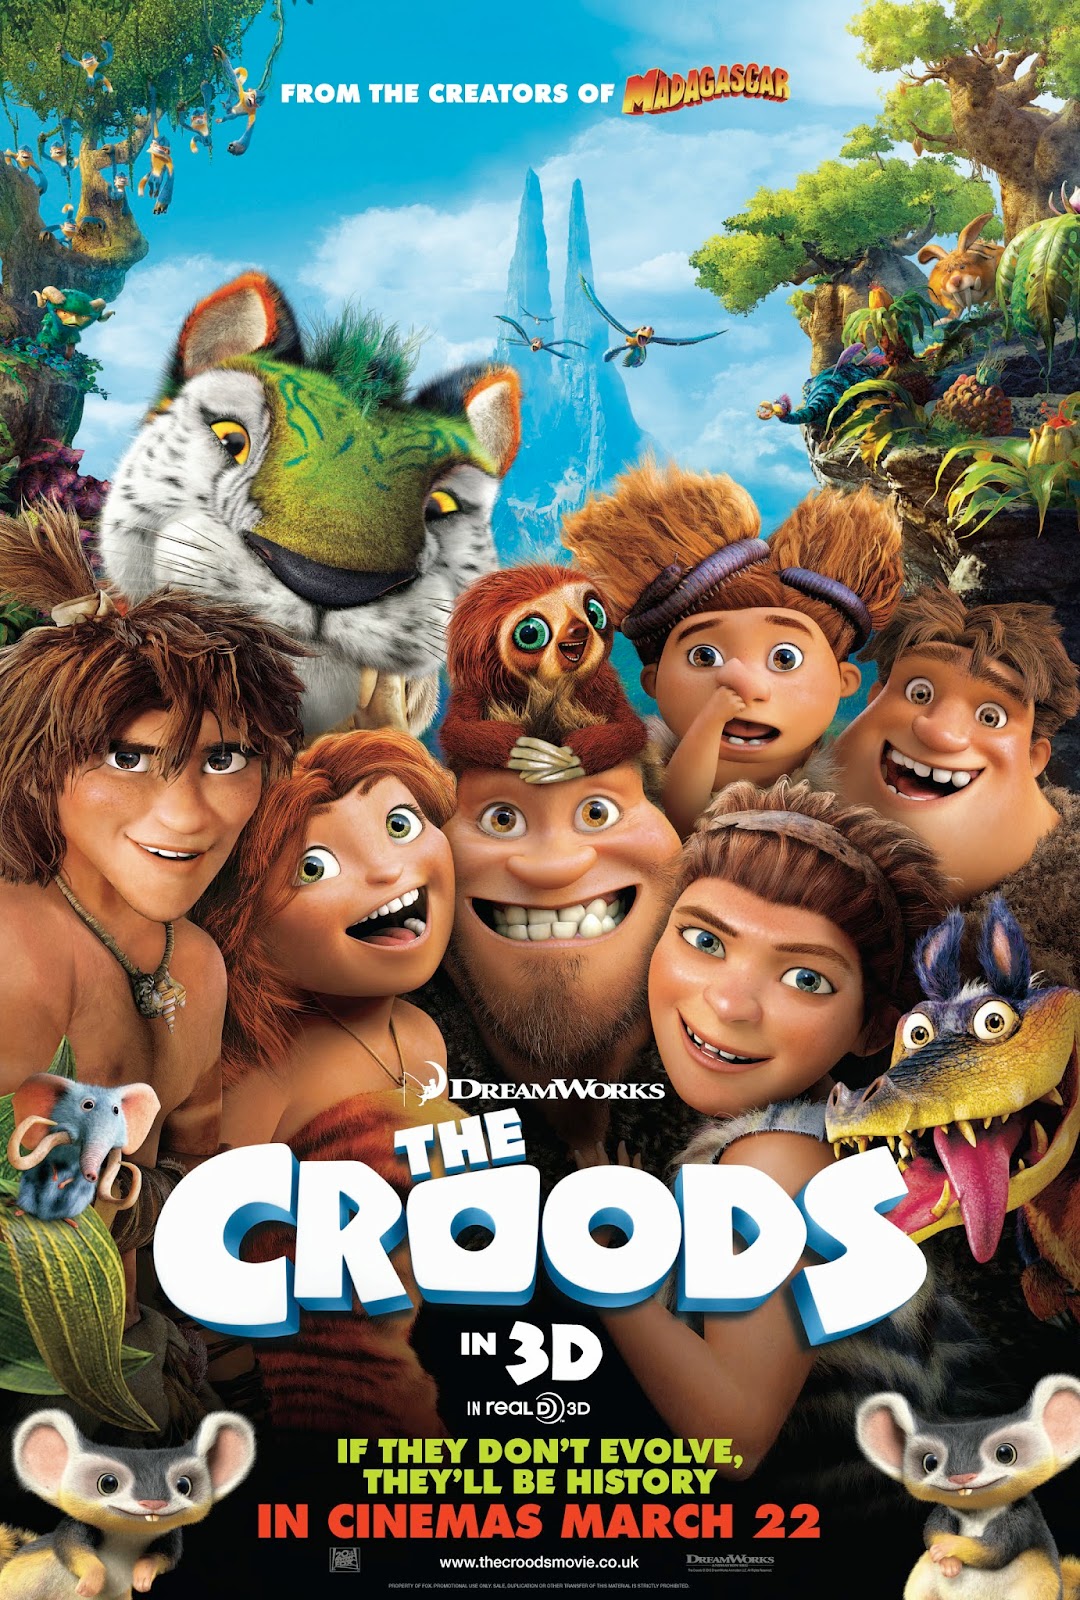 FREE DOWNLOAD FILM THE CROODS SUBTITLE BAHASA INDONESIA PUSAT